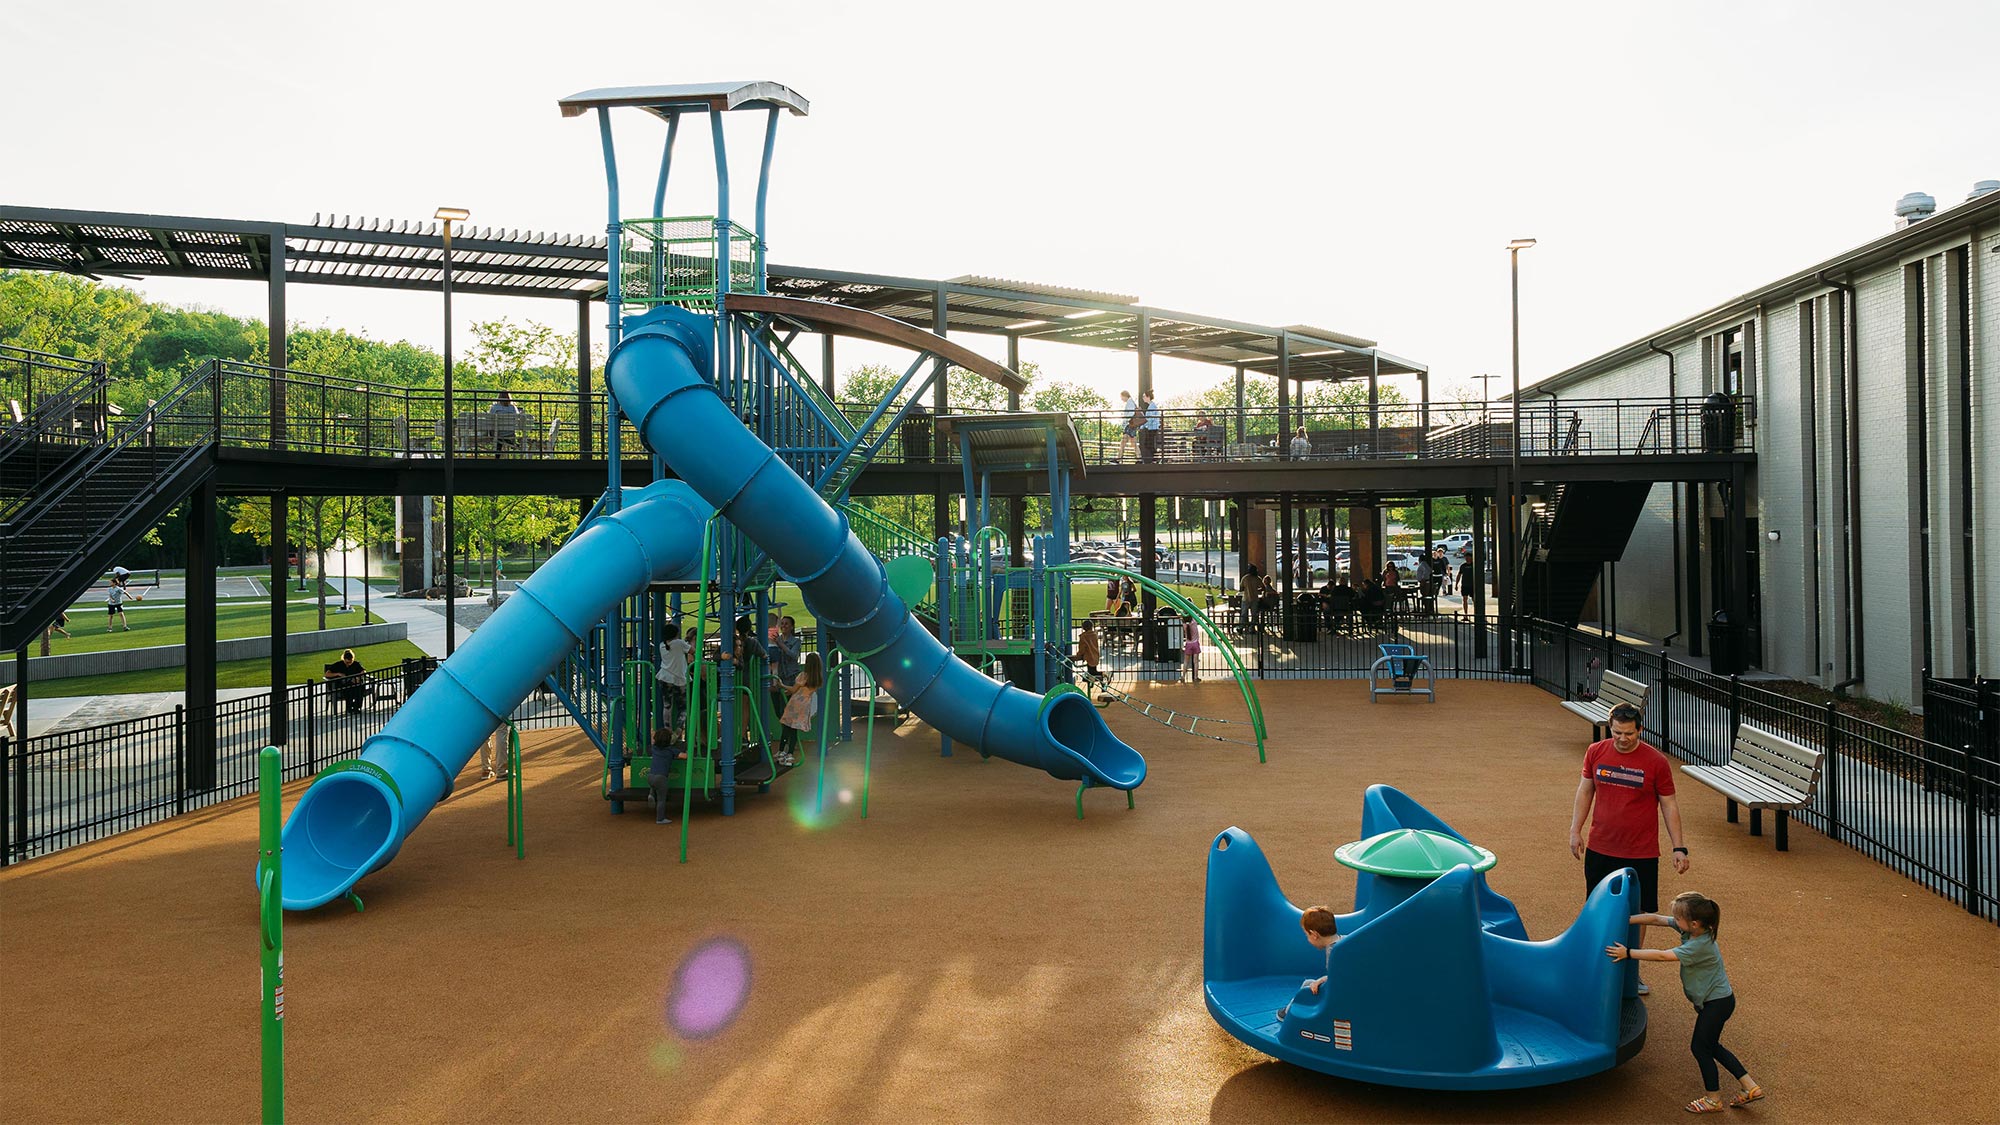 The large playground environment at Legacy Park